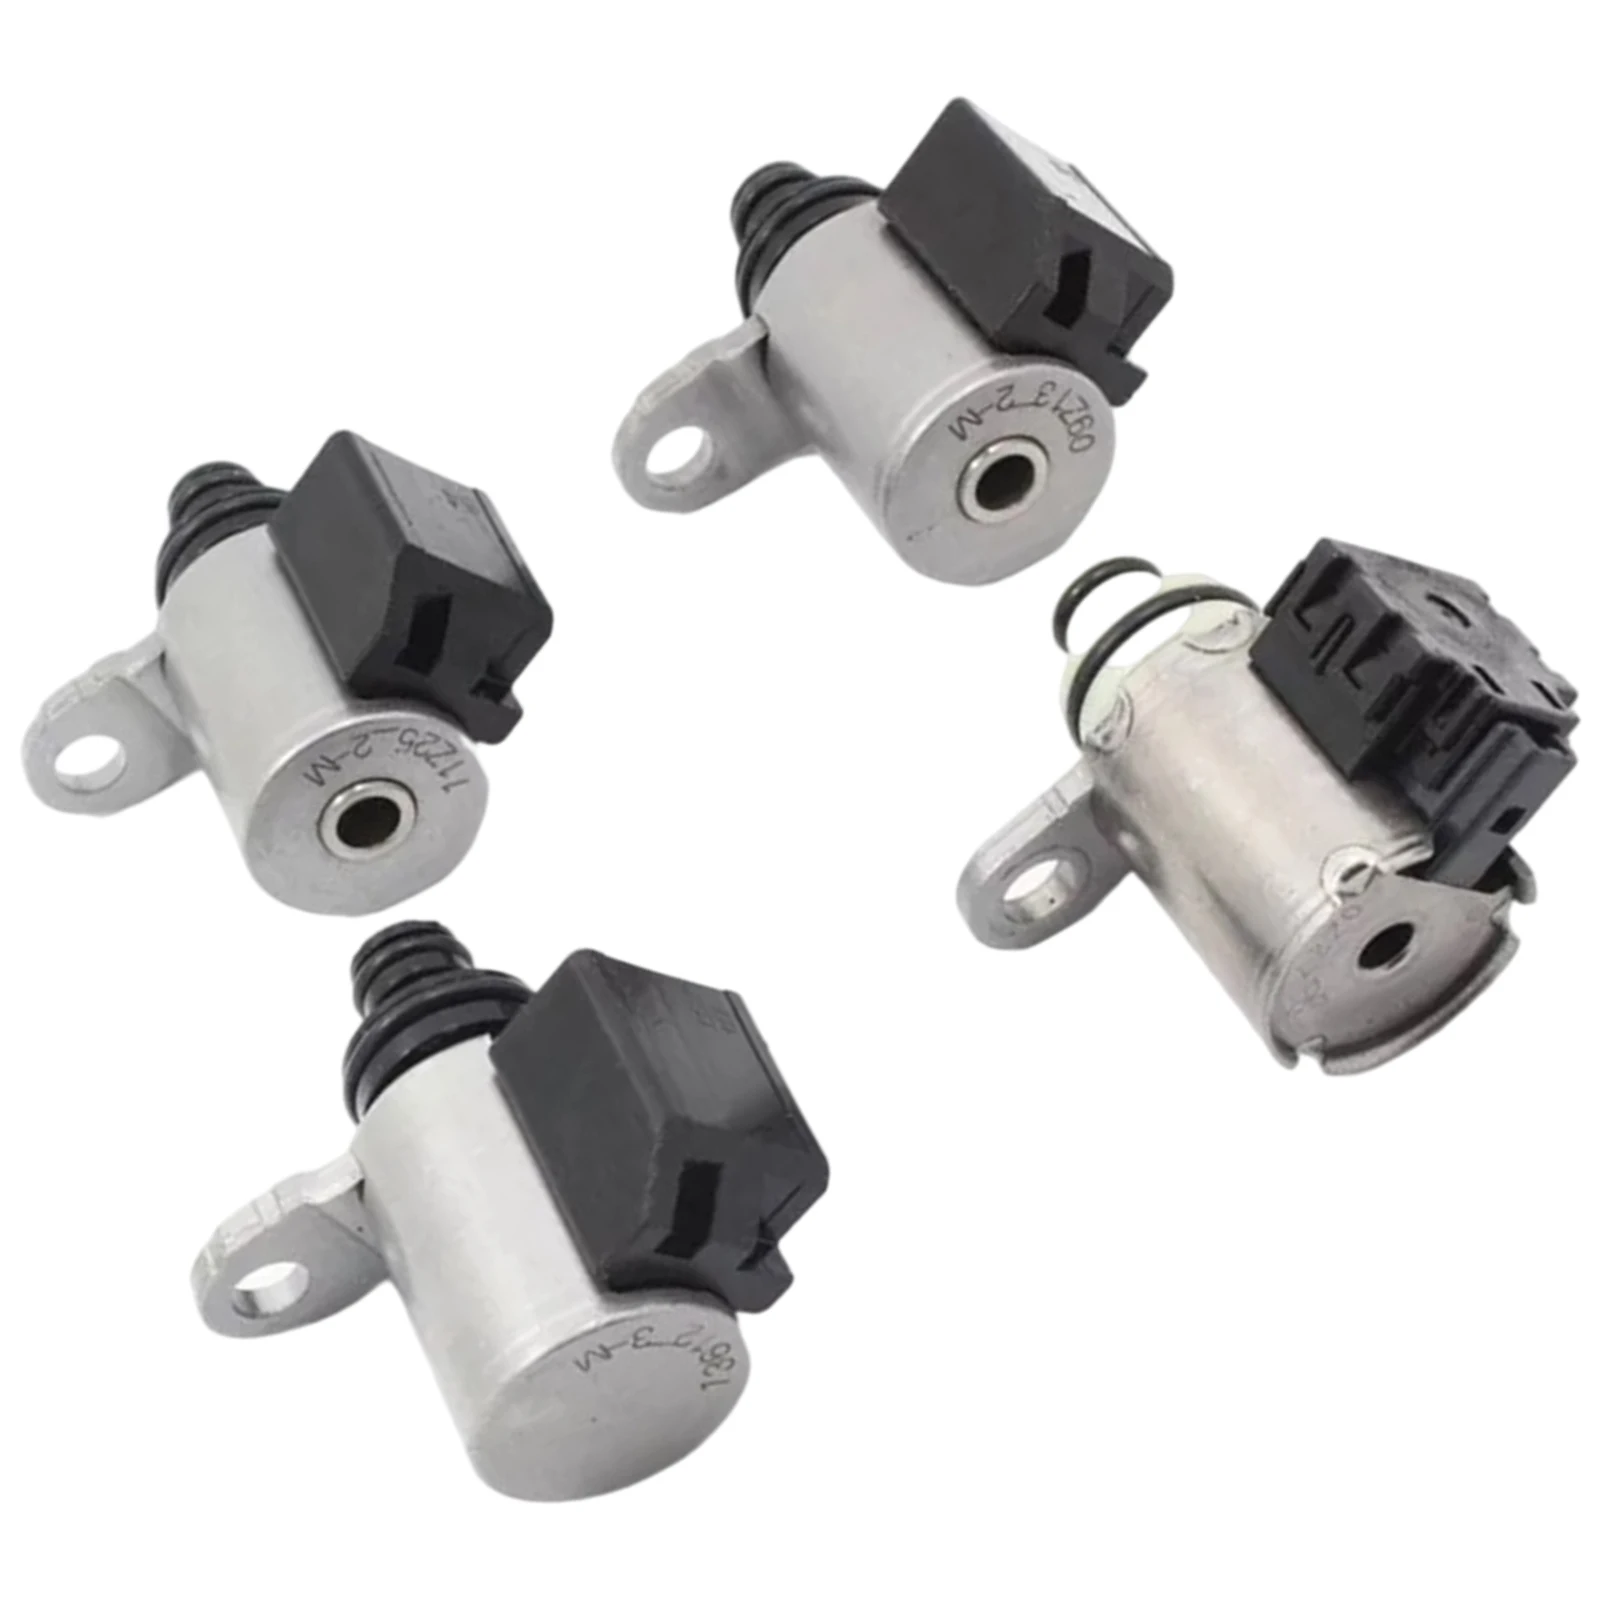 

4x Transmission Valve Solenoid Kit for Altima 09-12 RE0F10A JF011E Replace Parts Acc